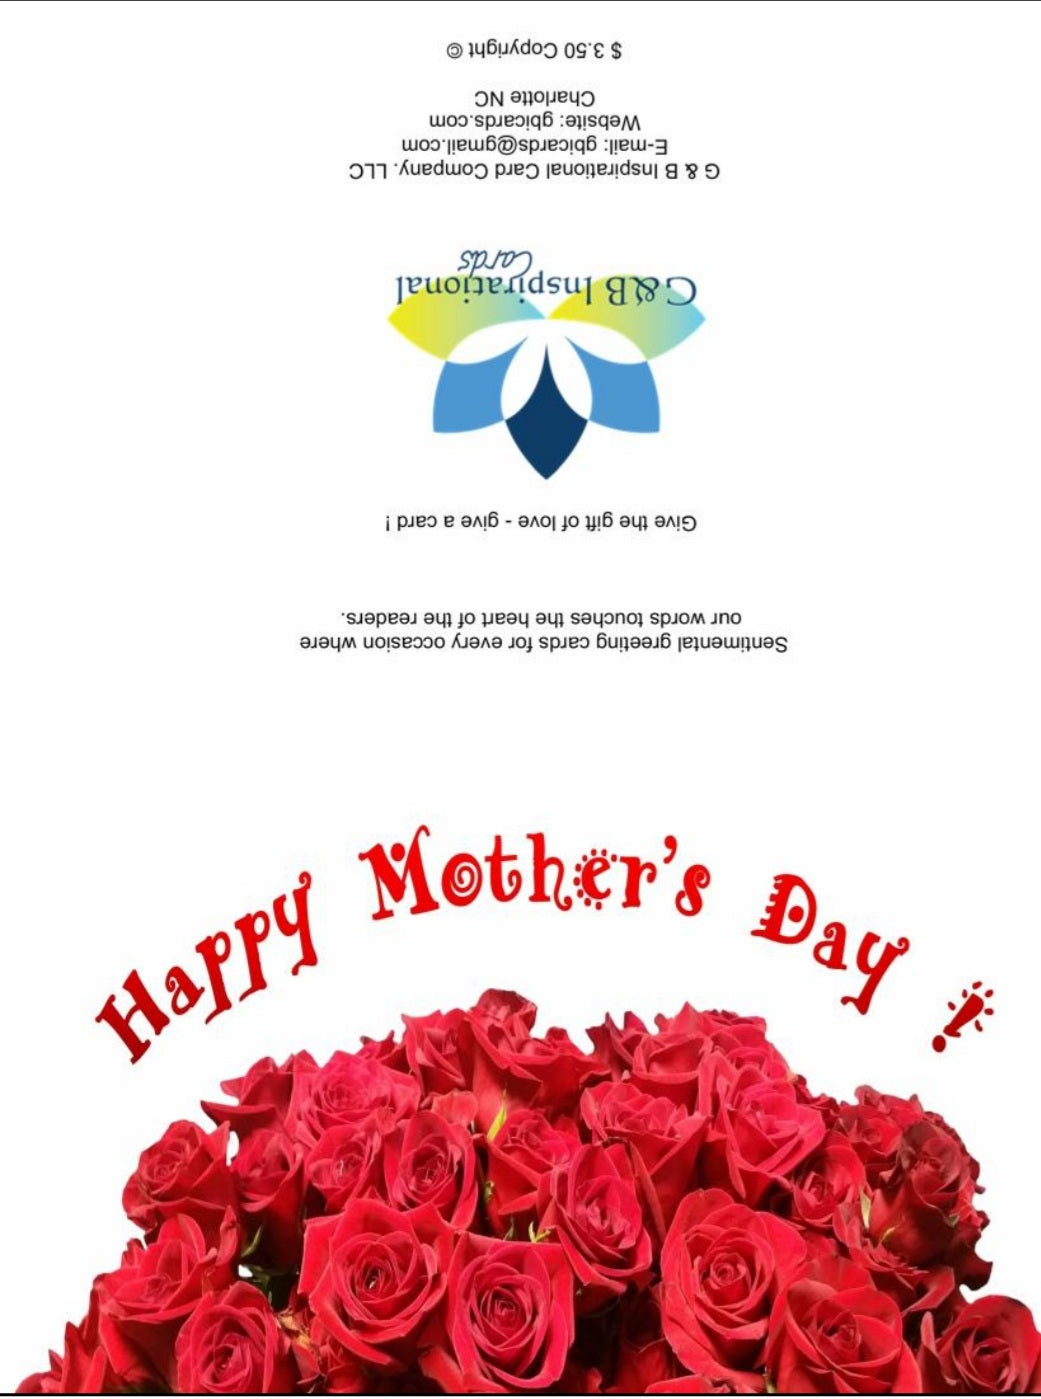 Happy Mother's Day Card #3